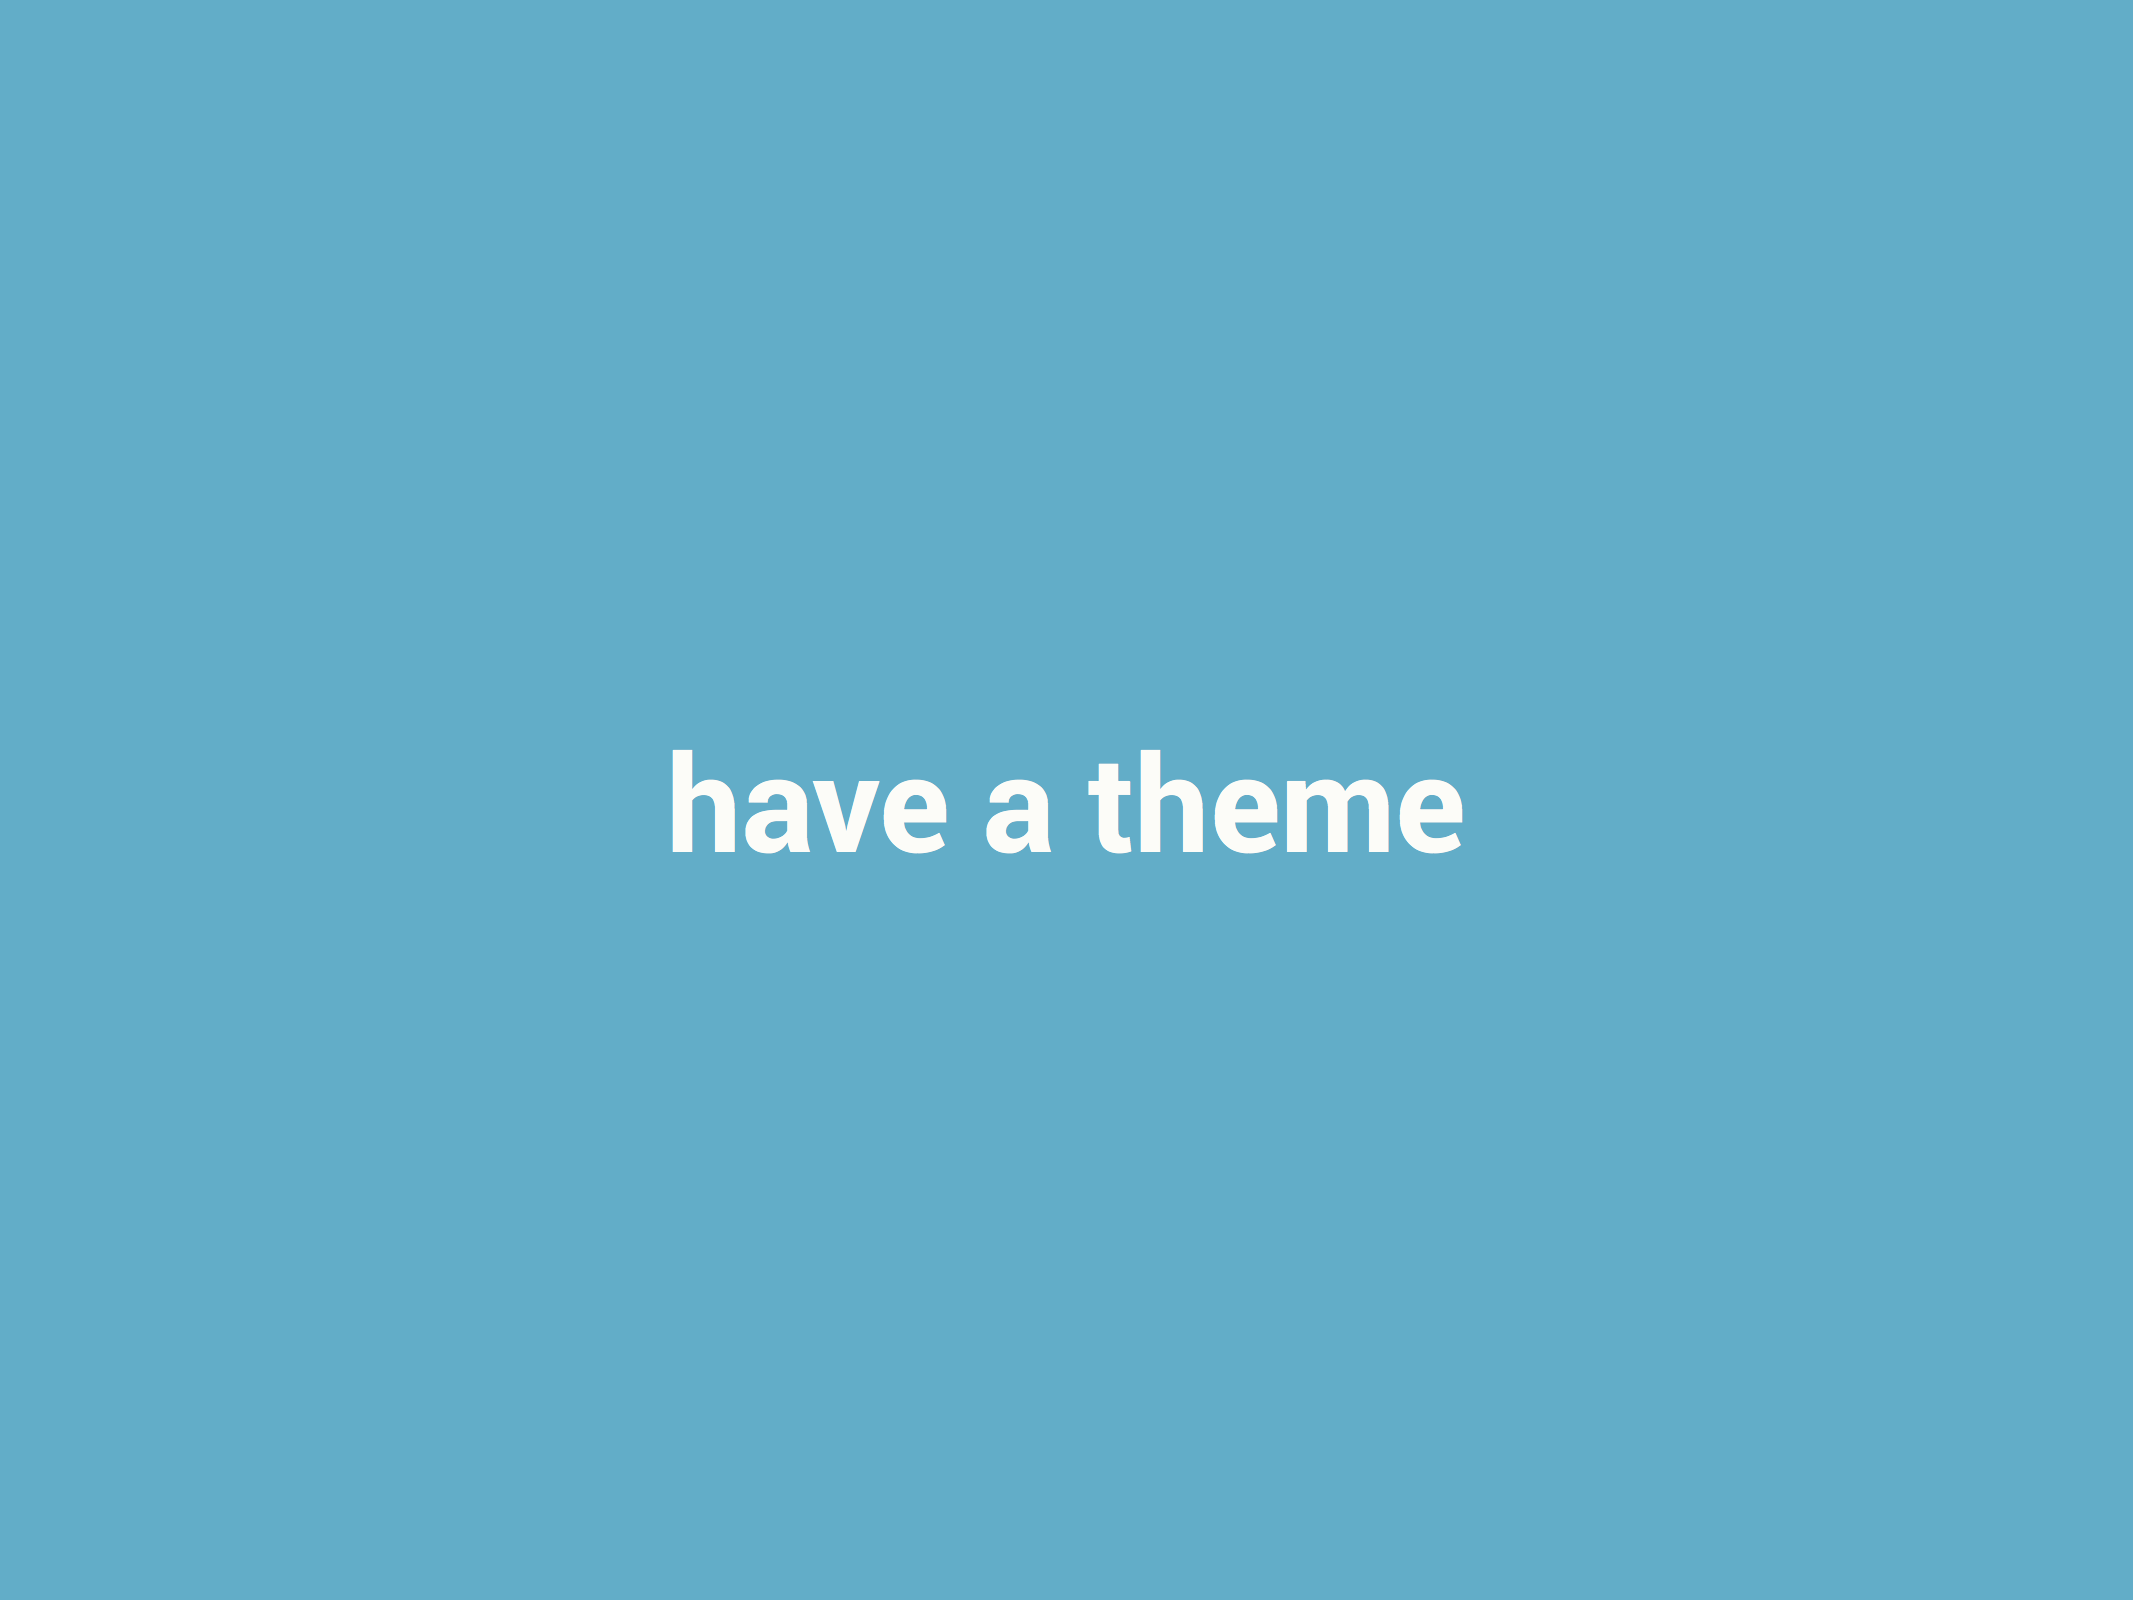 Example of Have a theme